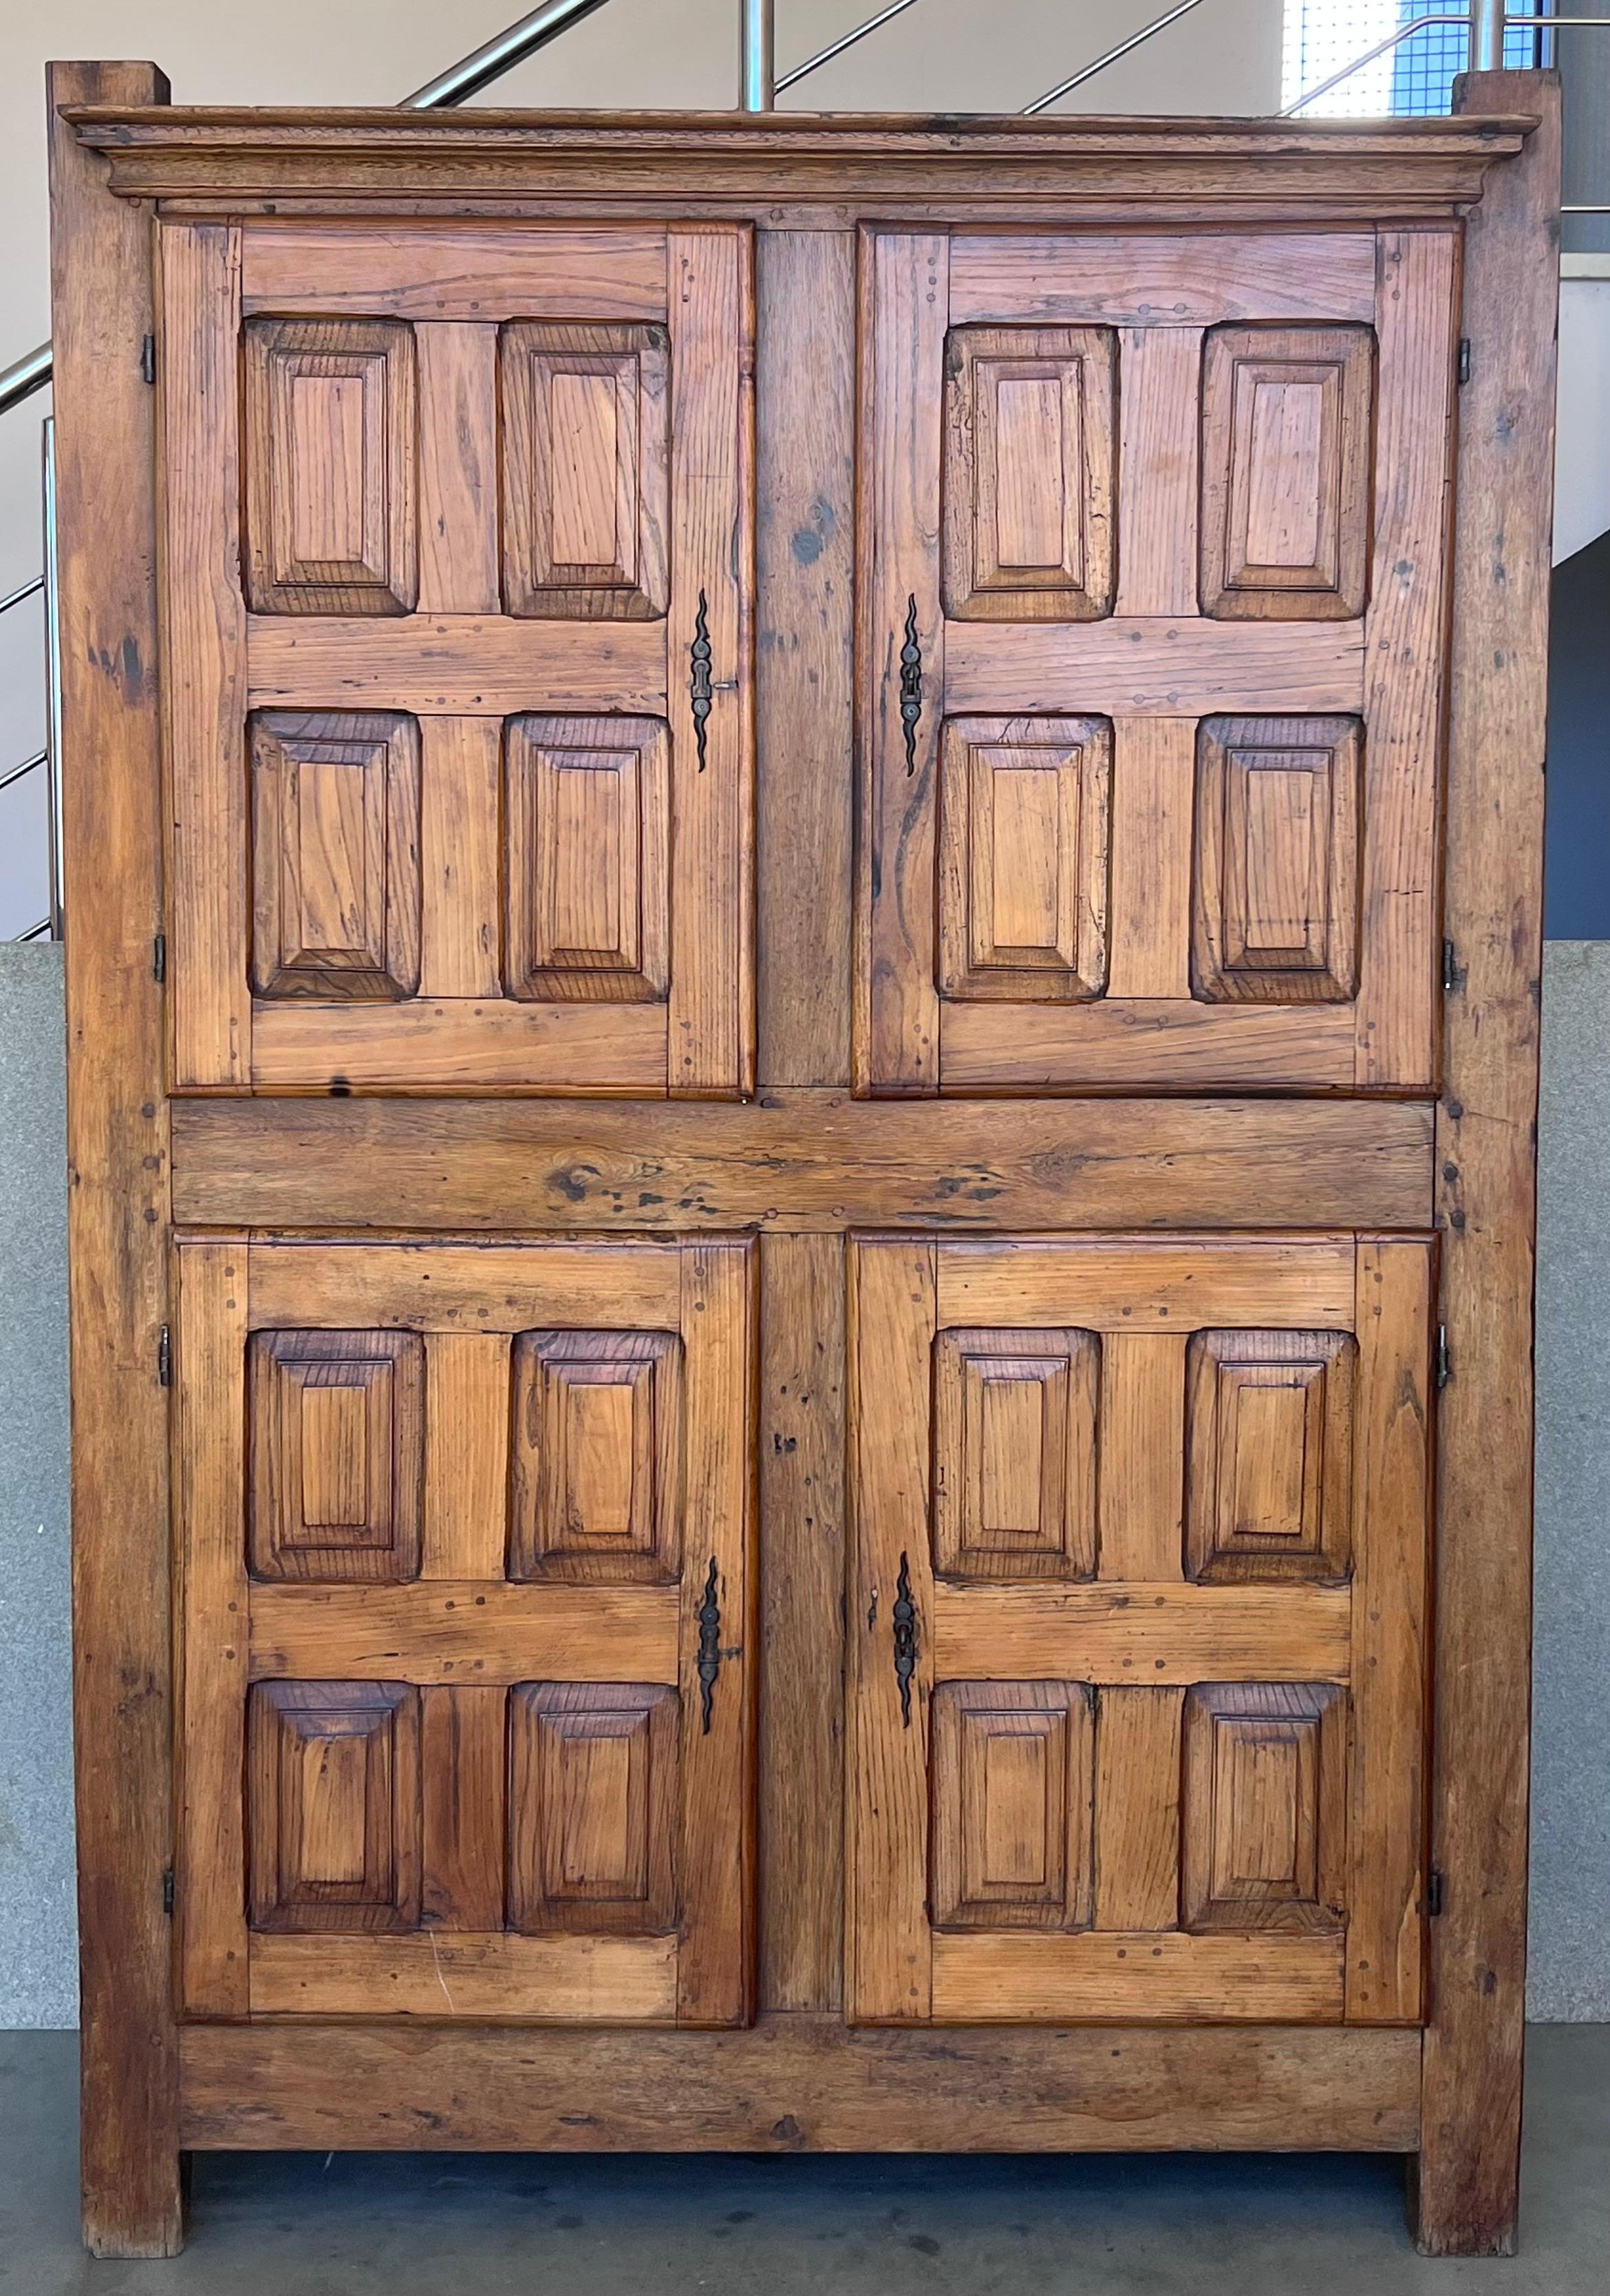 Exquisite 18th century Spanish armario or wardrobe armoire constructed from walnut. Features a coffered case fronted by four large doors. This massive cabinet made in Spain features beautiful walnut grain and showcases the amazing craftsmanship.